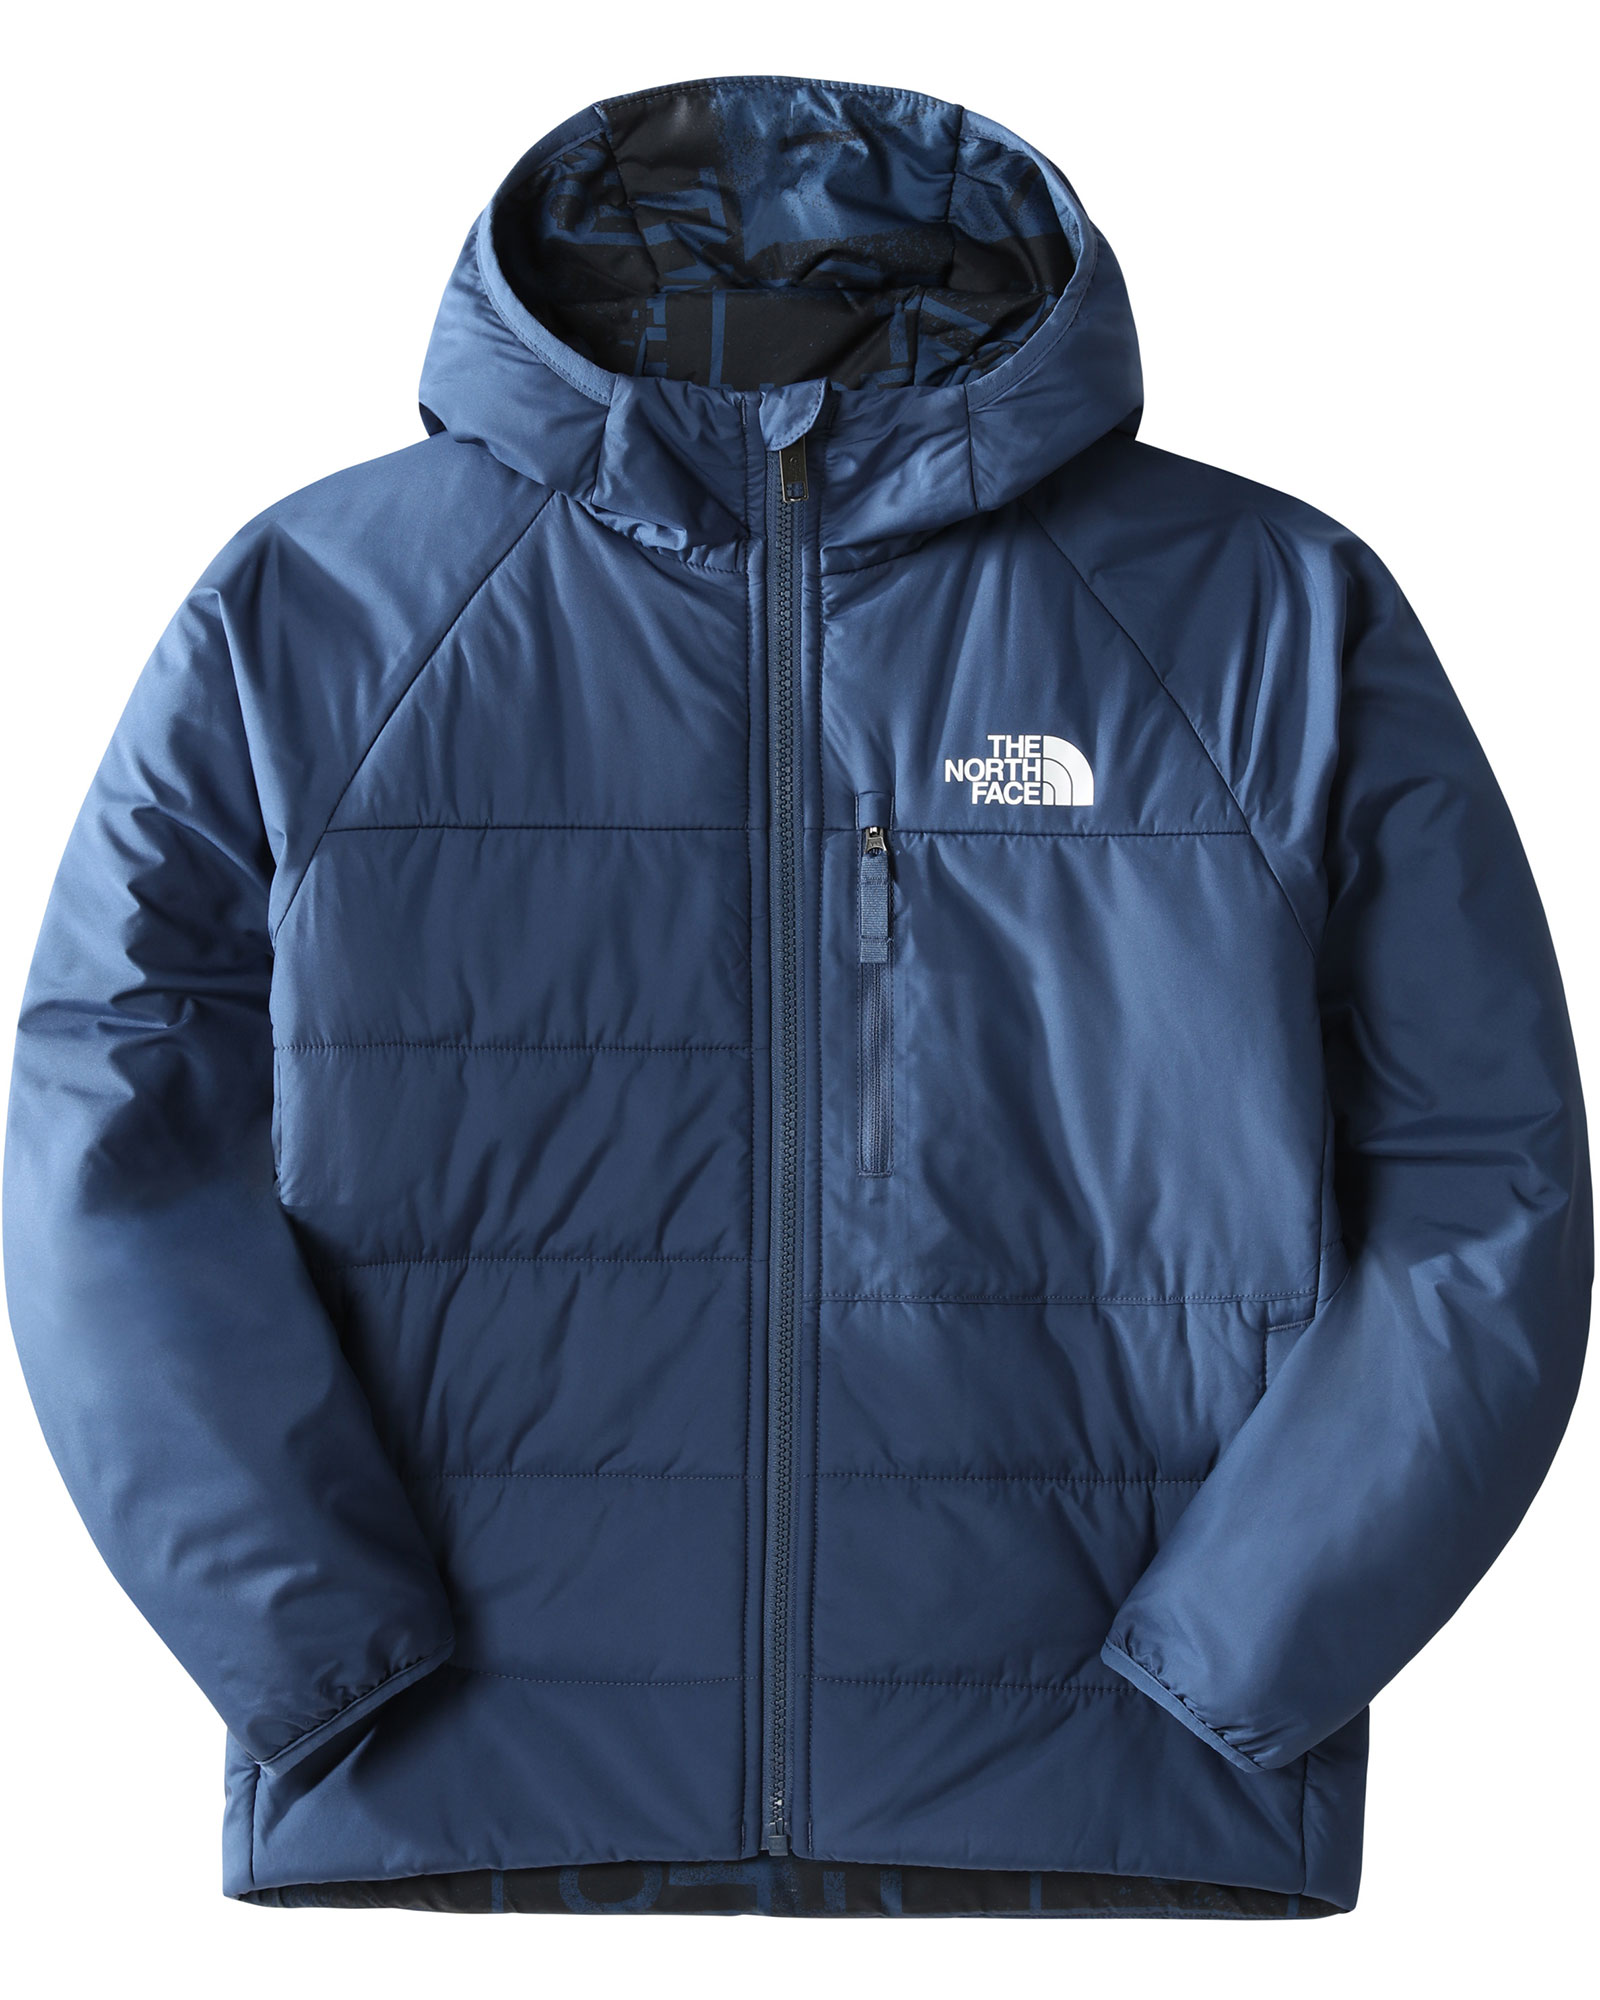 The North Face Reversible Perrito Kids Jacket Xl